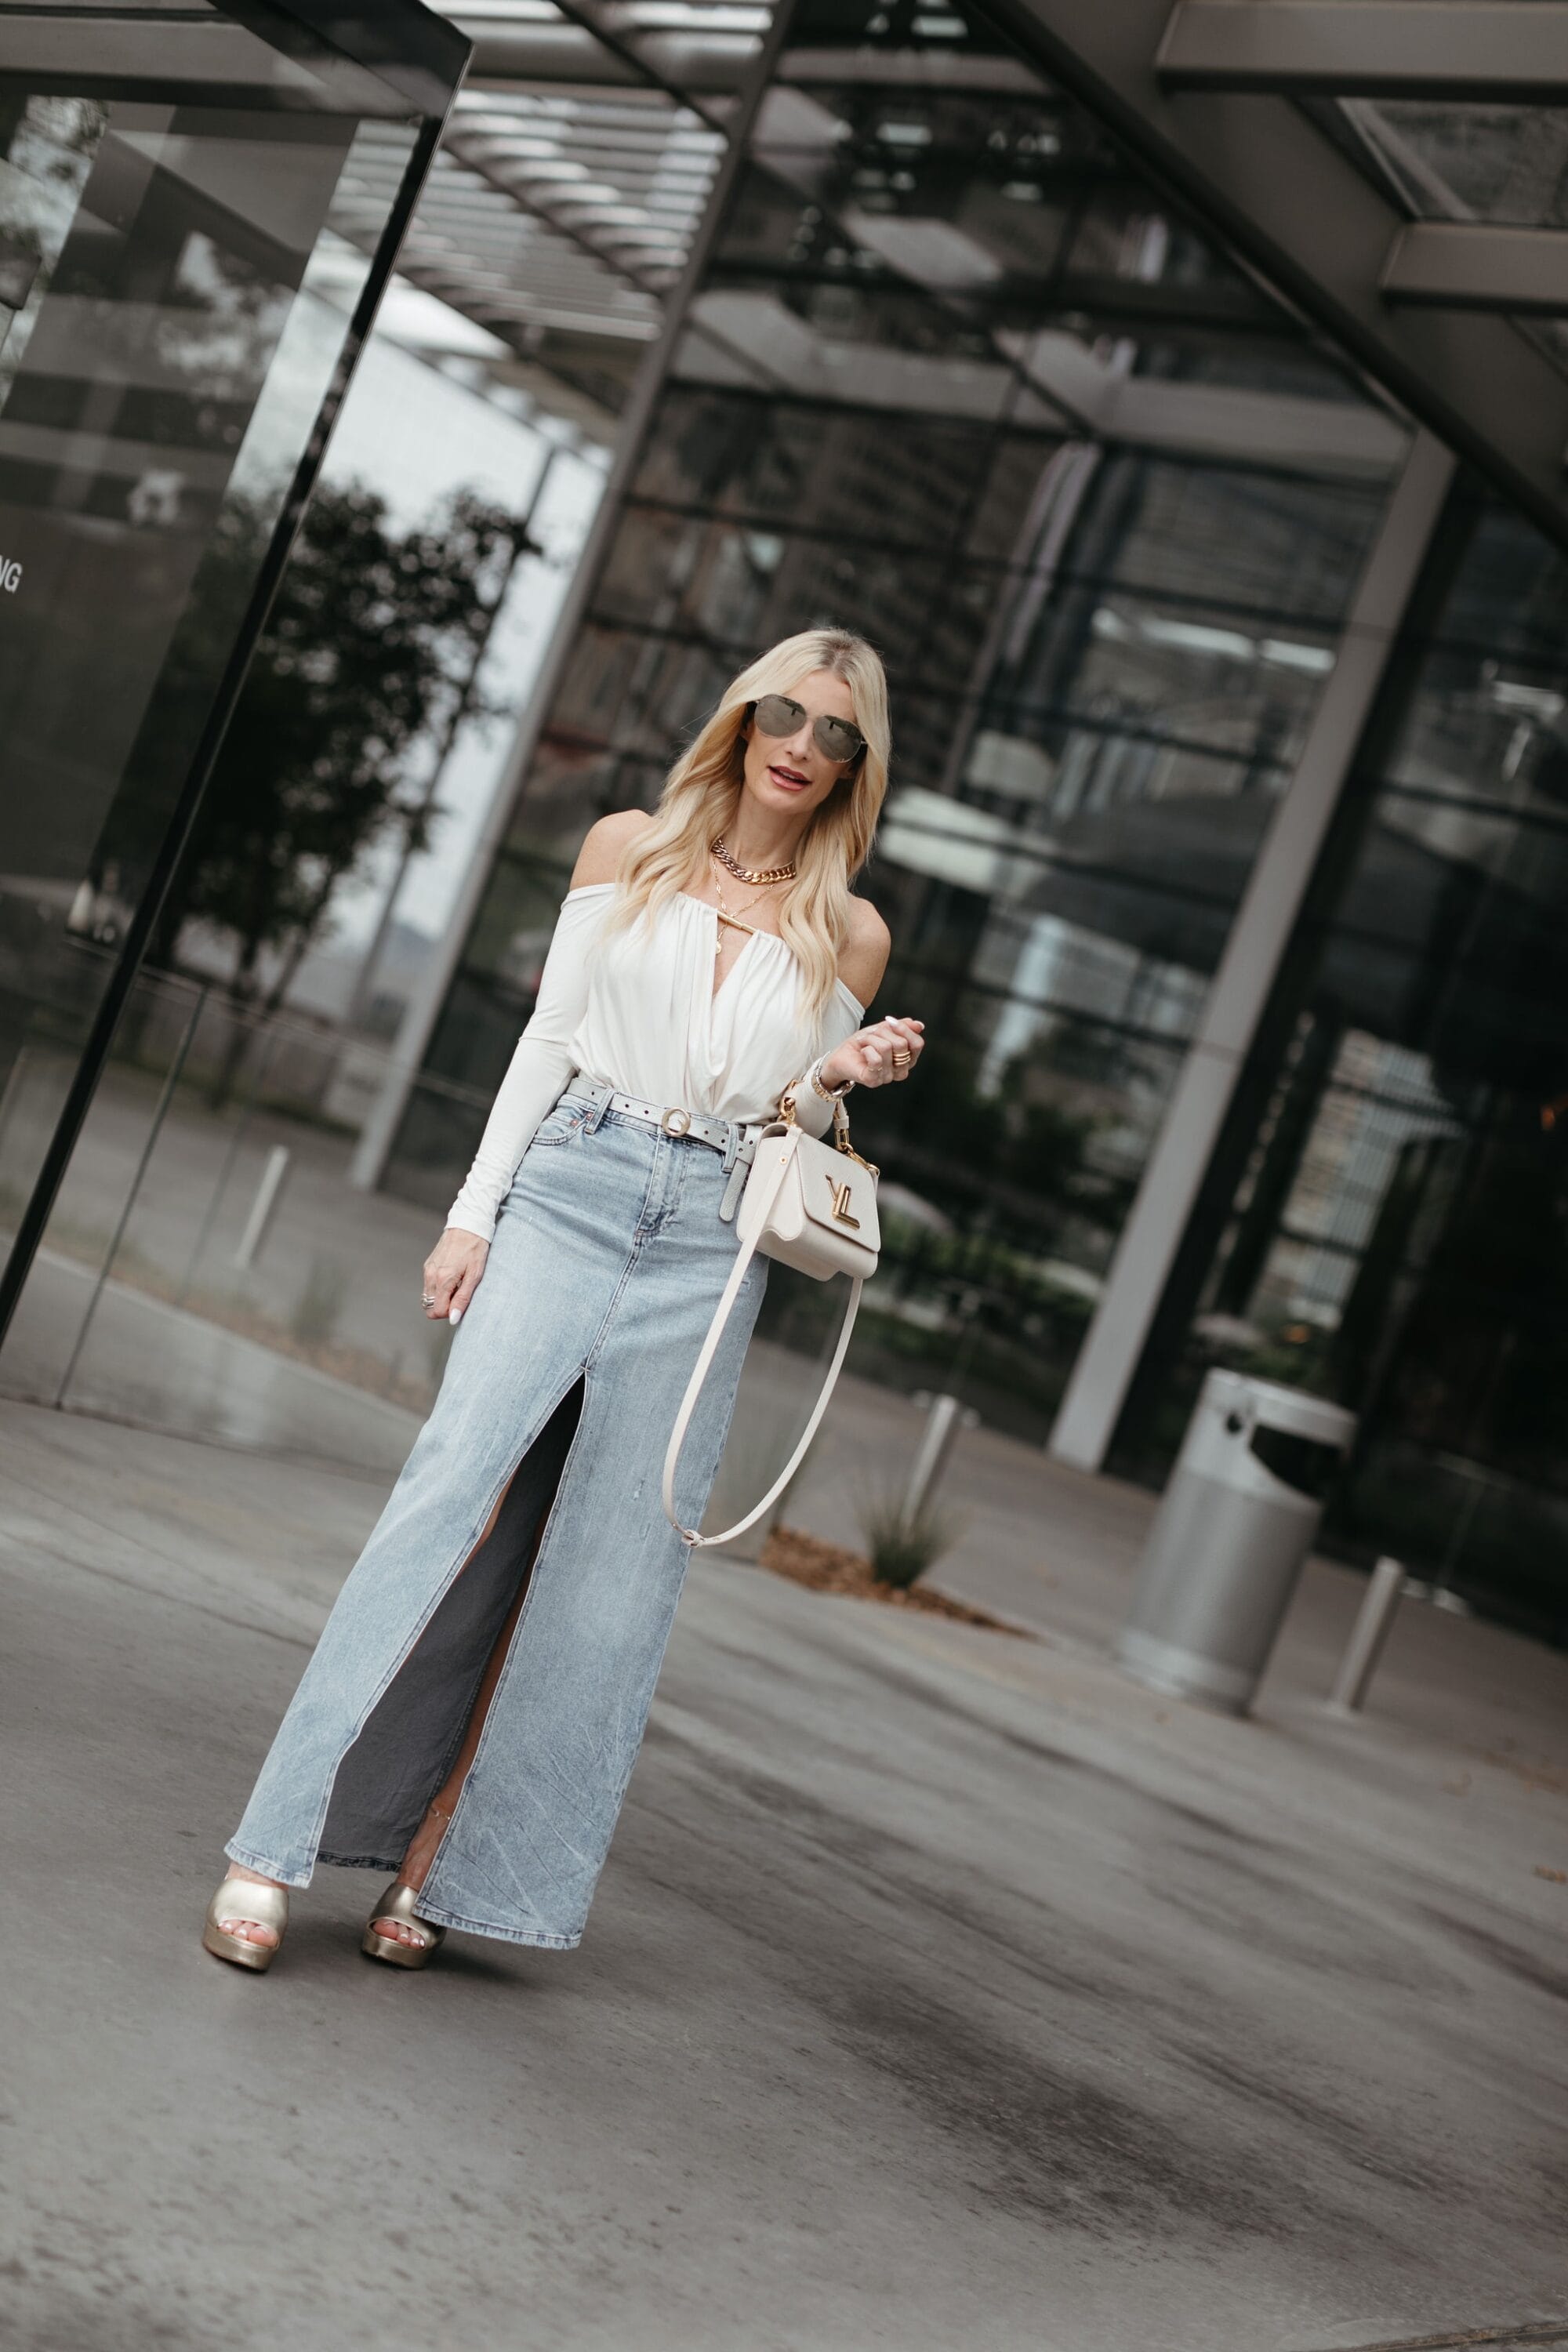 Over 40 fashion blogger showing how to style a denim midi skirt with a white top.